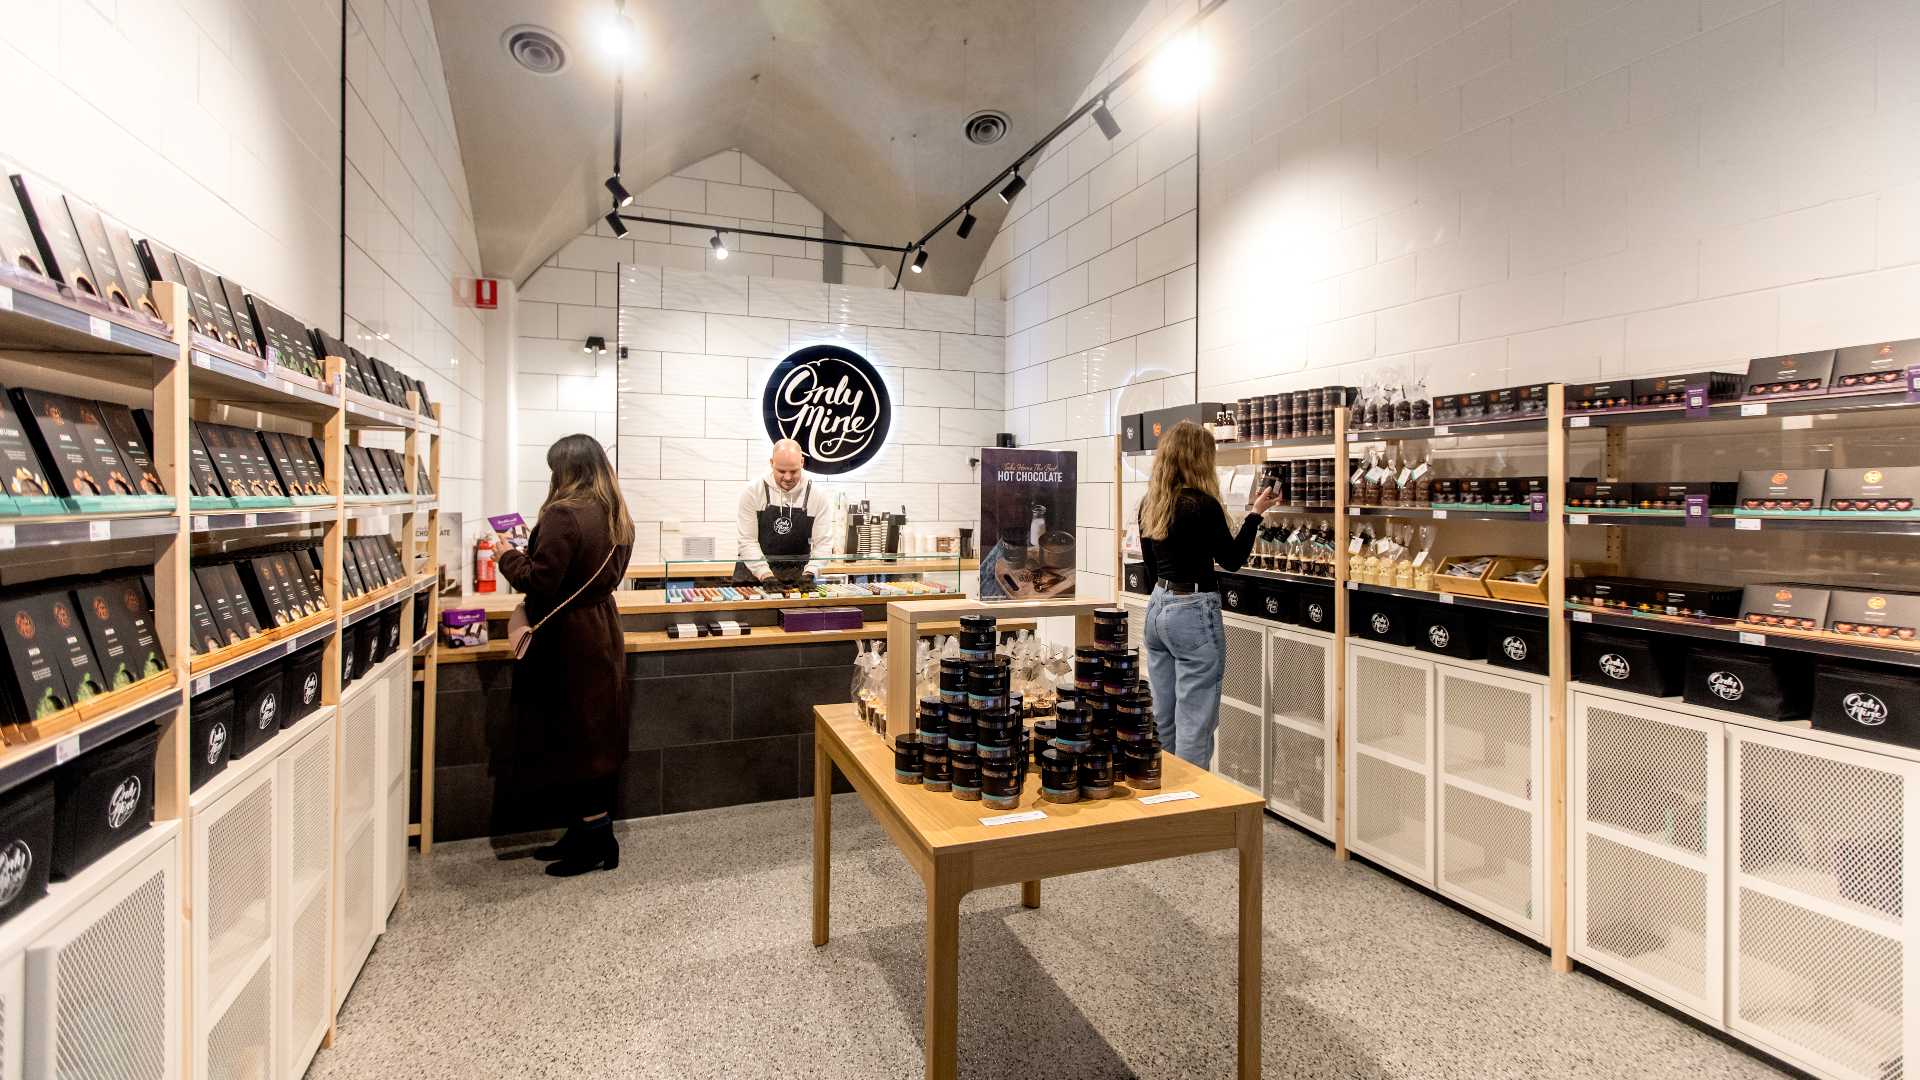 Only Mine Chocolaterie Just Opened Its Third Store in the Queen Vic's New Munro Development